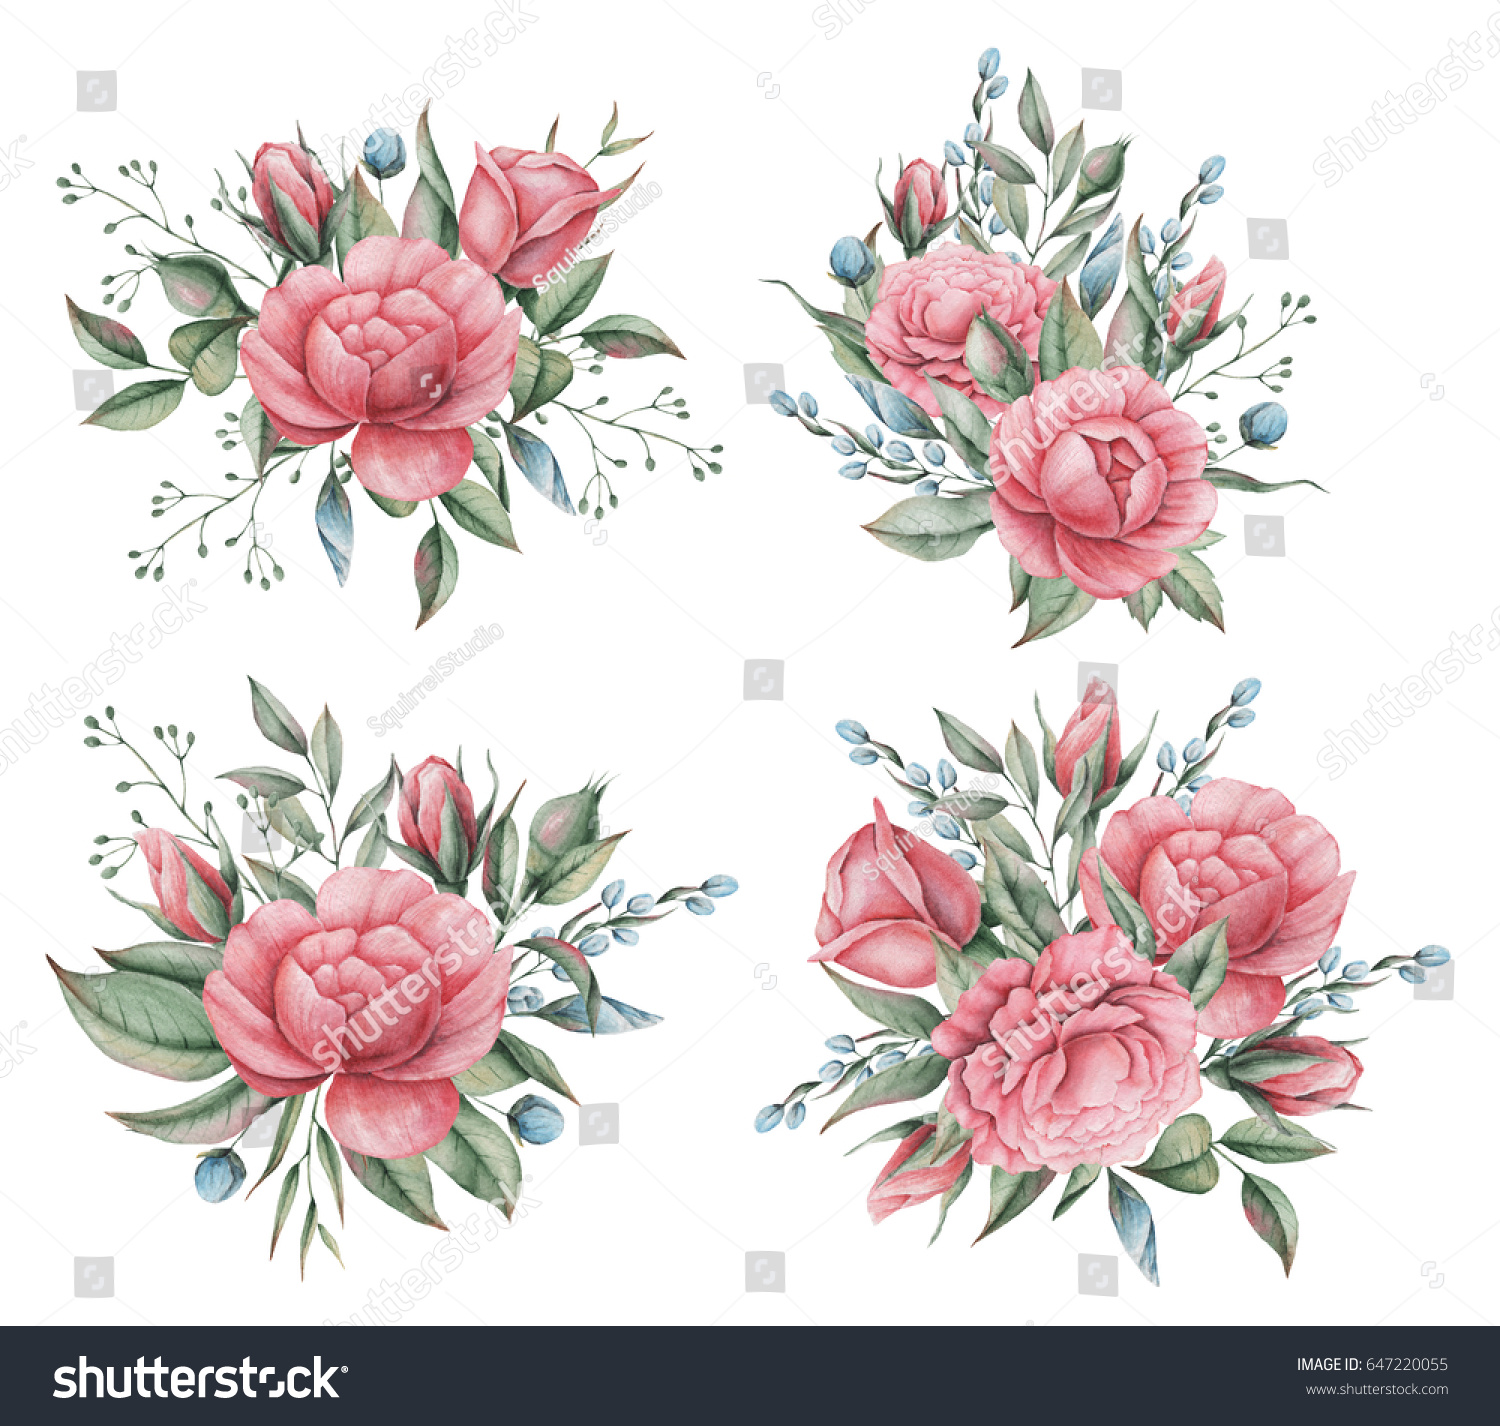 Hand Painted Watercolor Charming Combination Flowers Stock Illustration  647220055